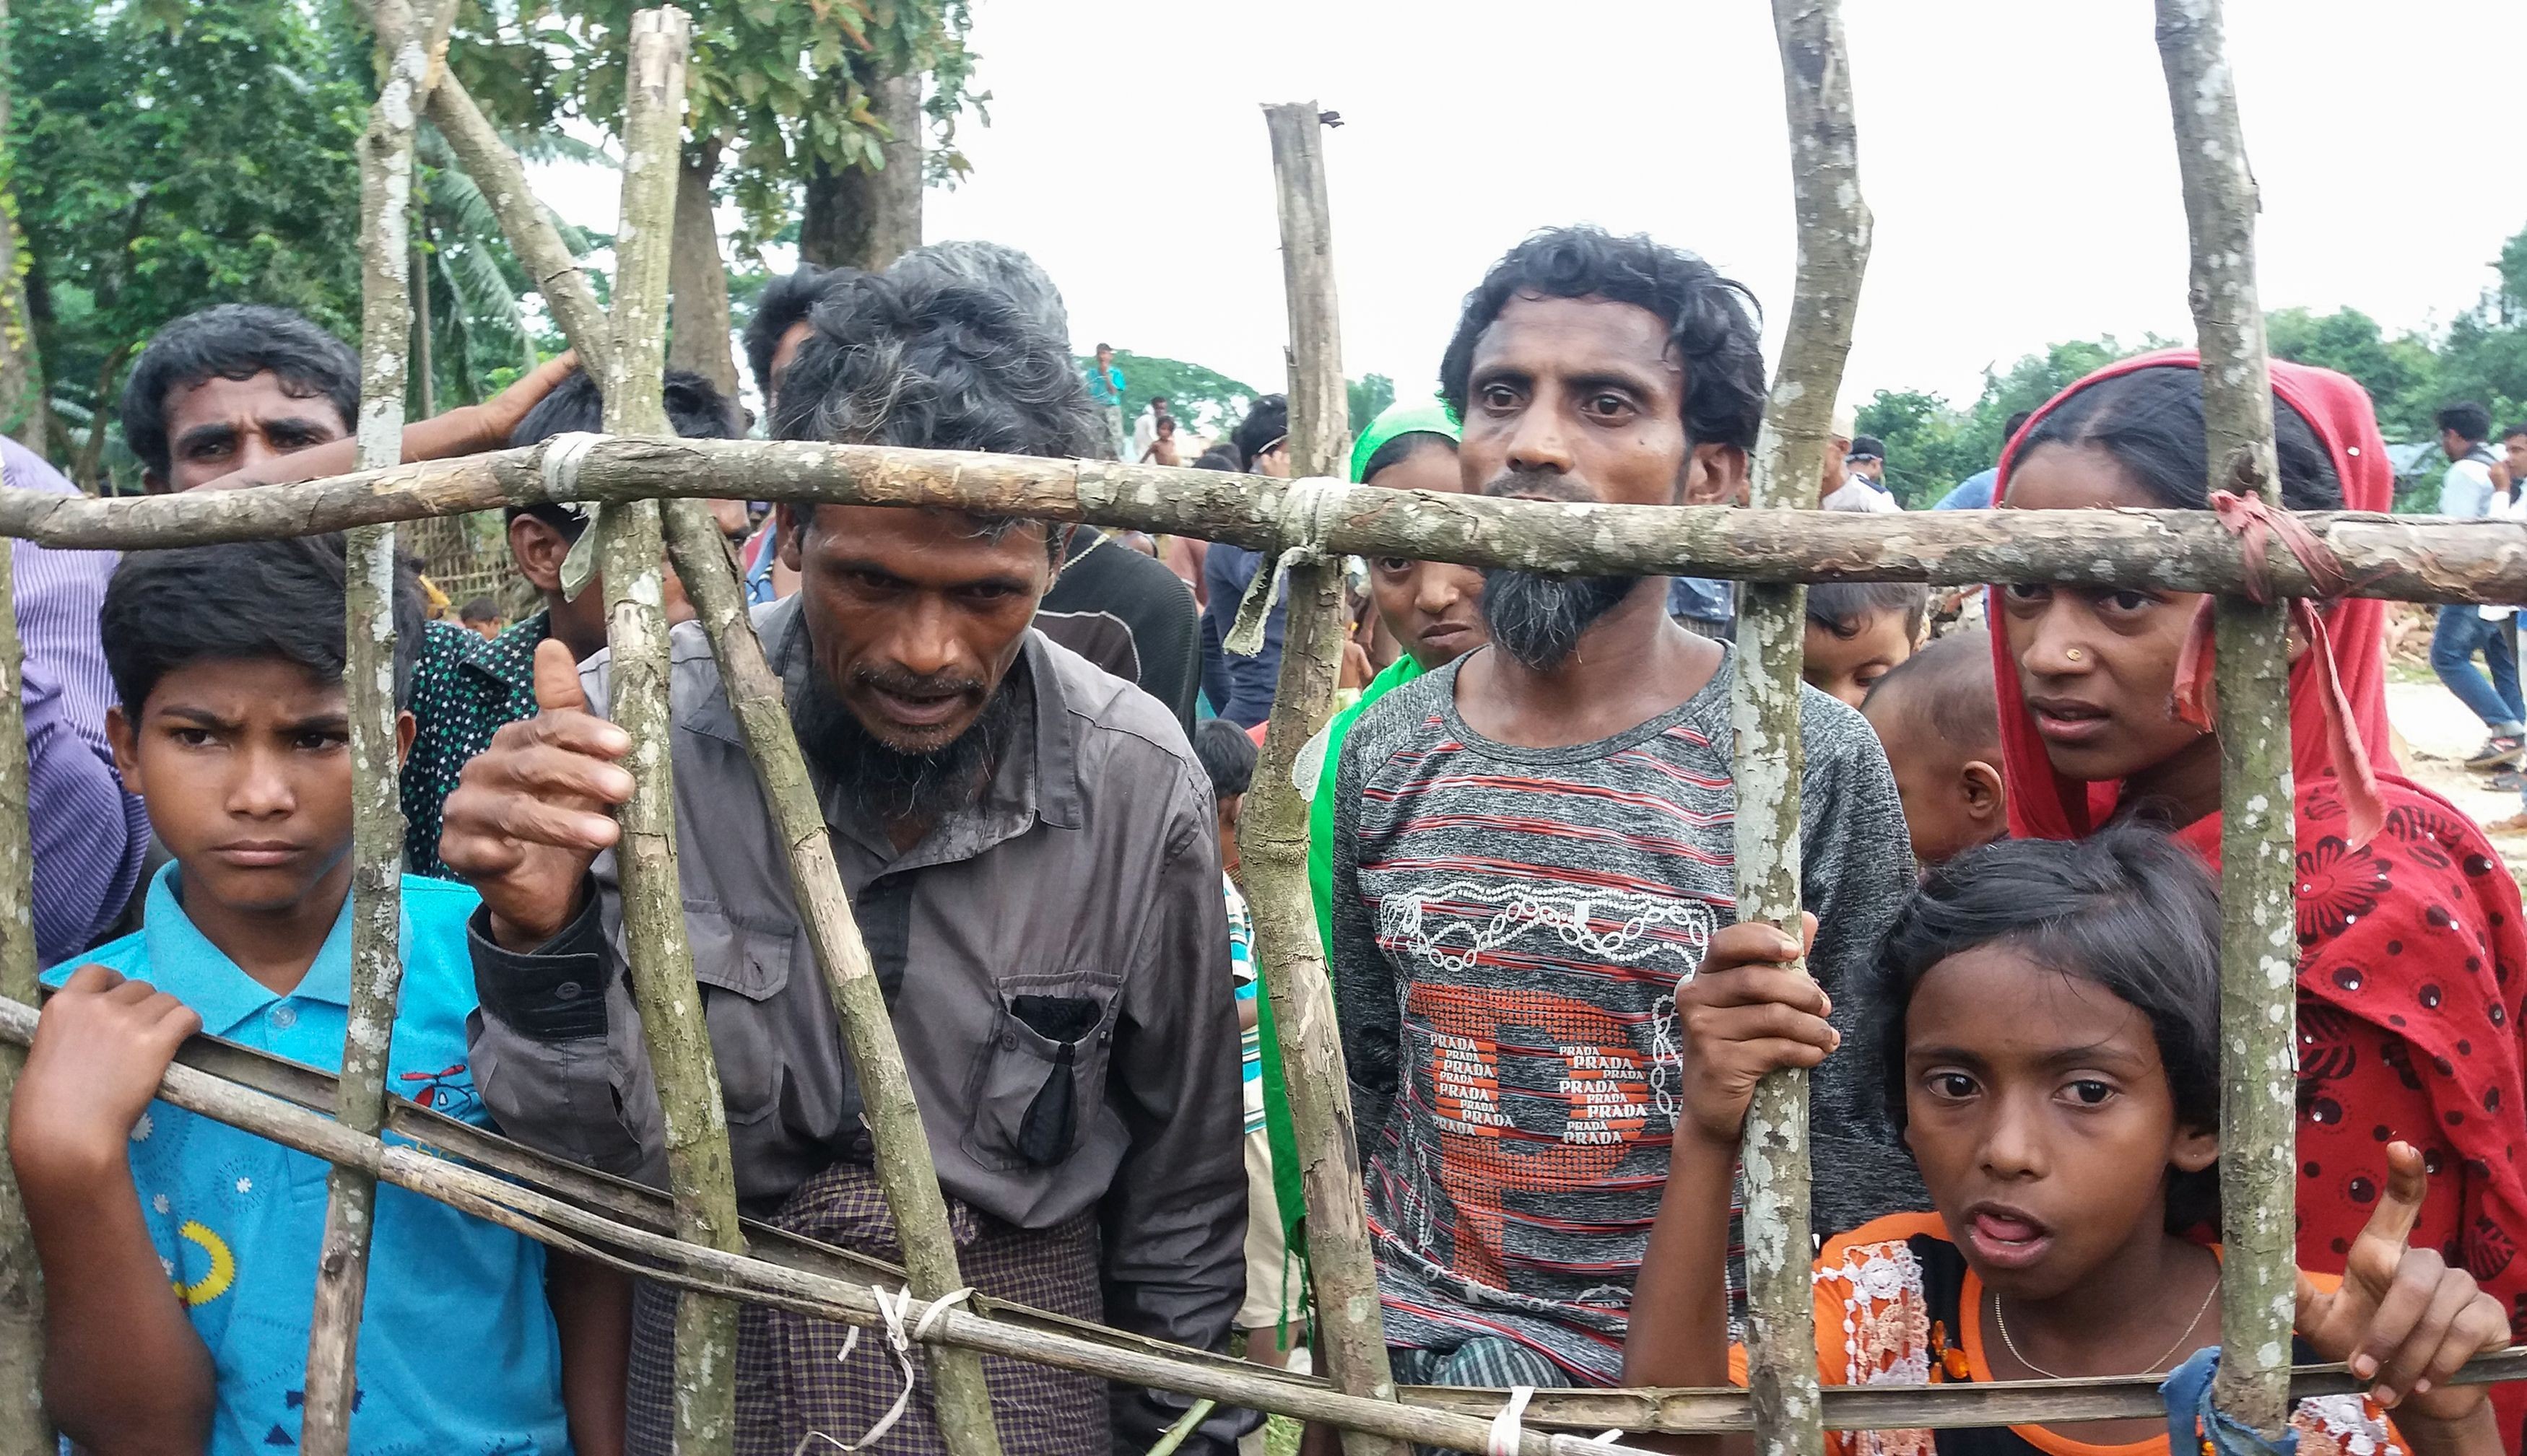 Rohingya refugees from Myanmar, victims of divisive identity politics in Southeast Asia, at a refugee camp in Bangladesh. Photo: AFP